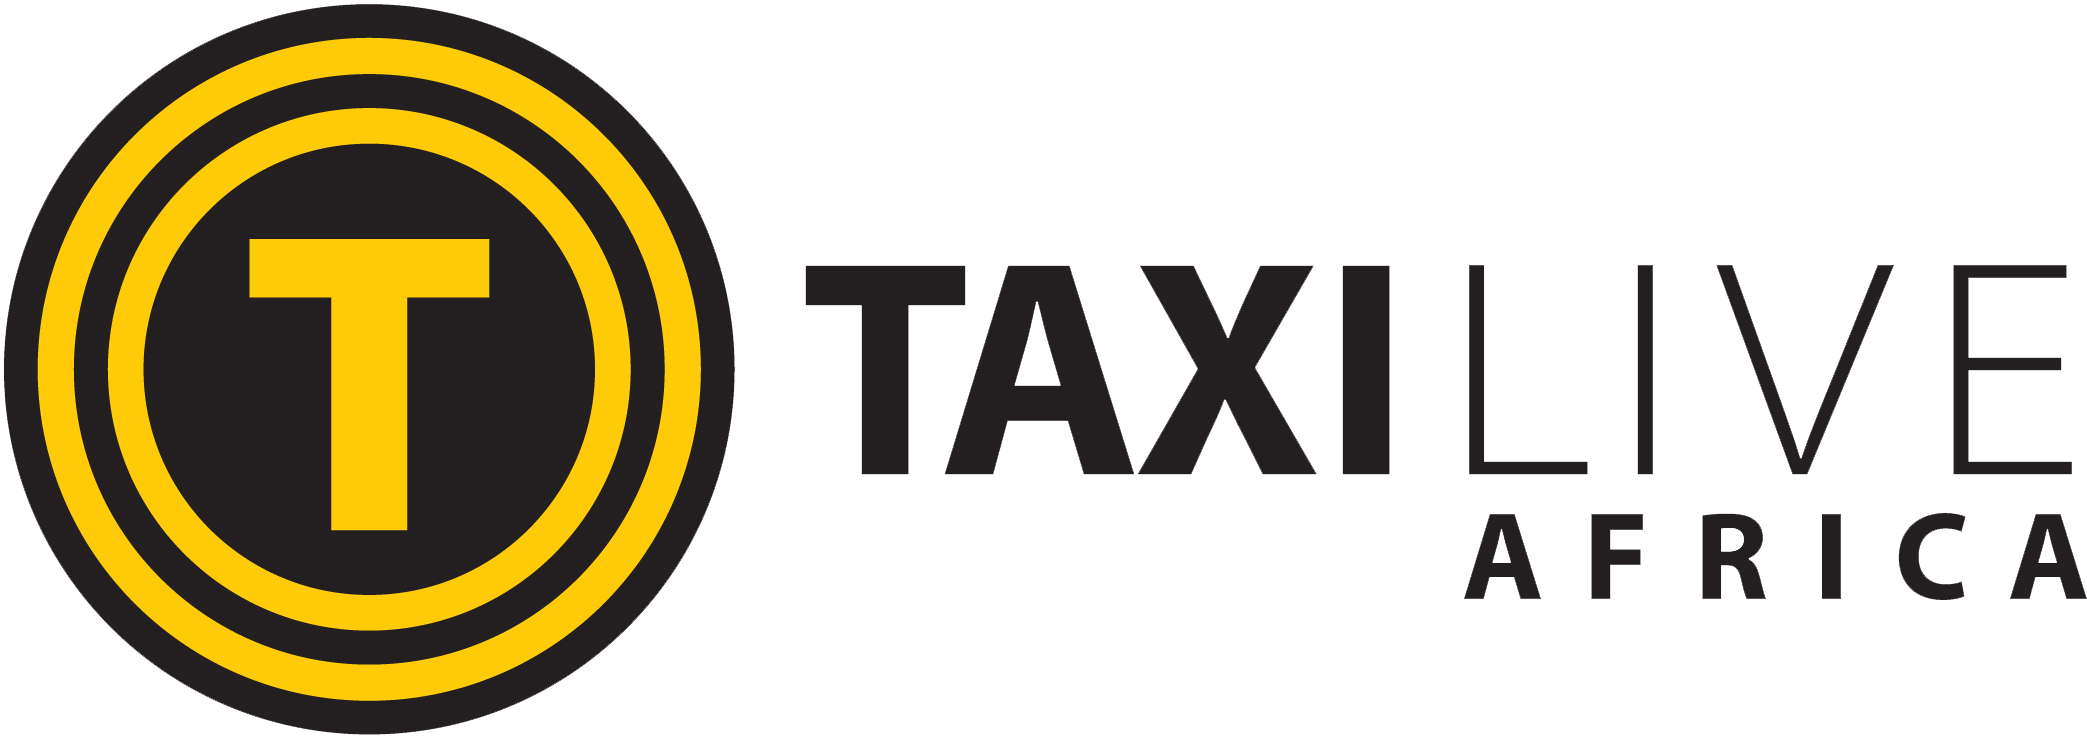 Taxi Live Africa